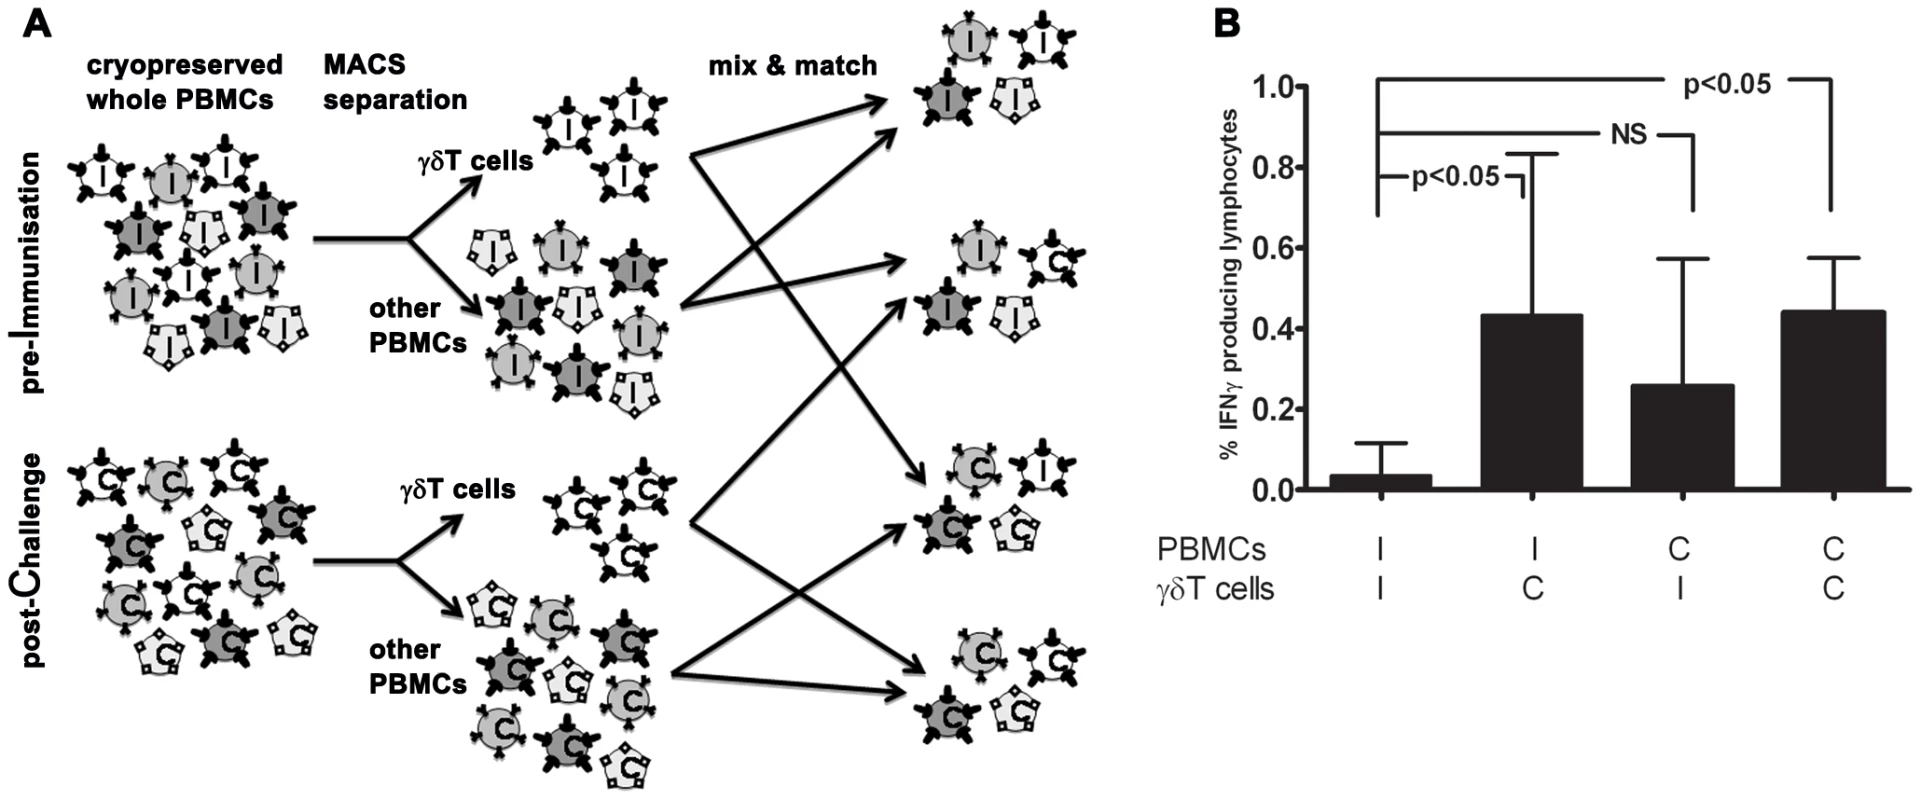 Immunological memory carriage by the γδT compartment vs other PBMC.